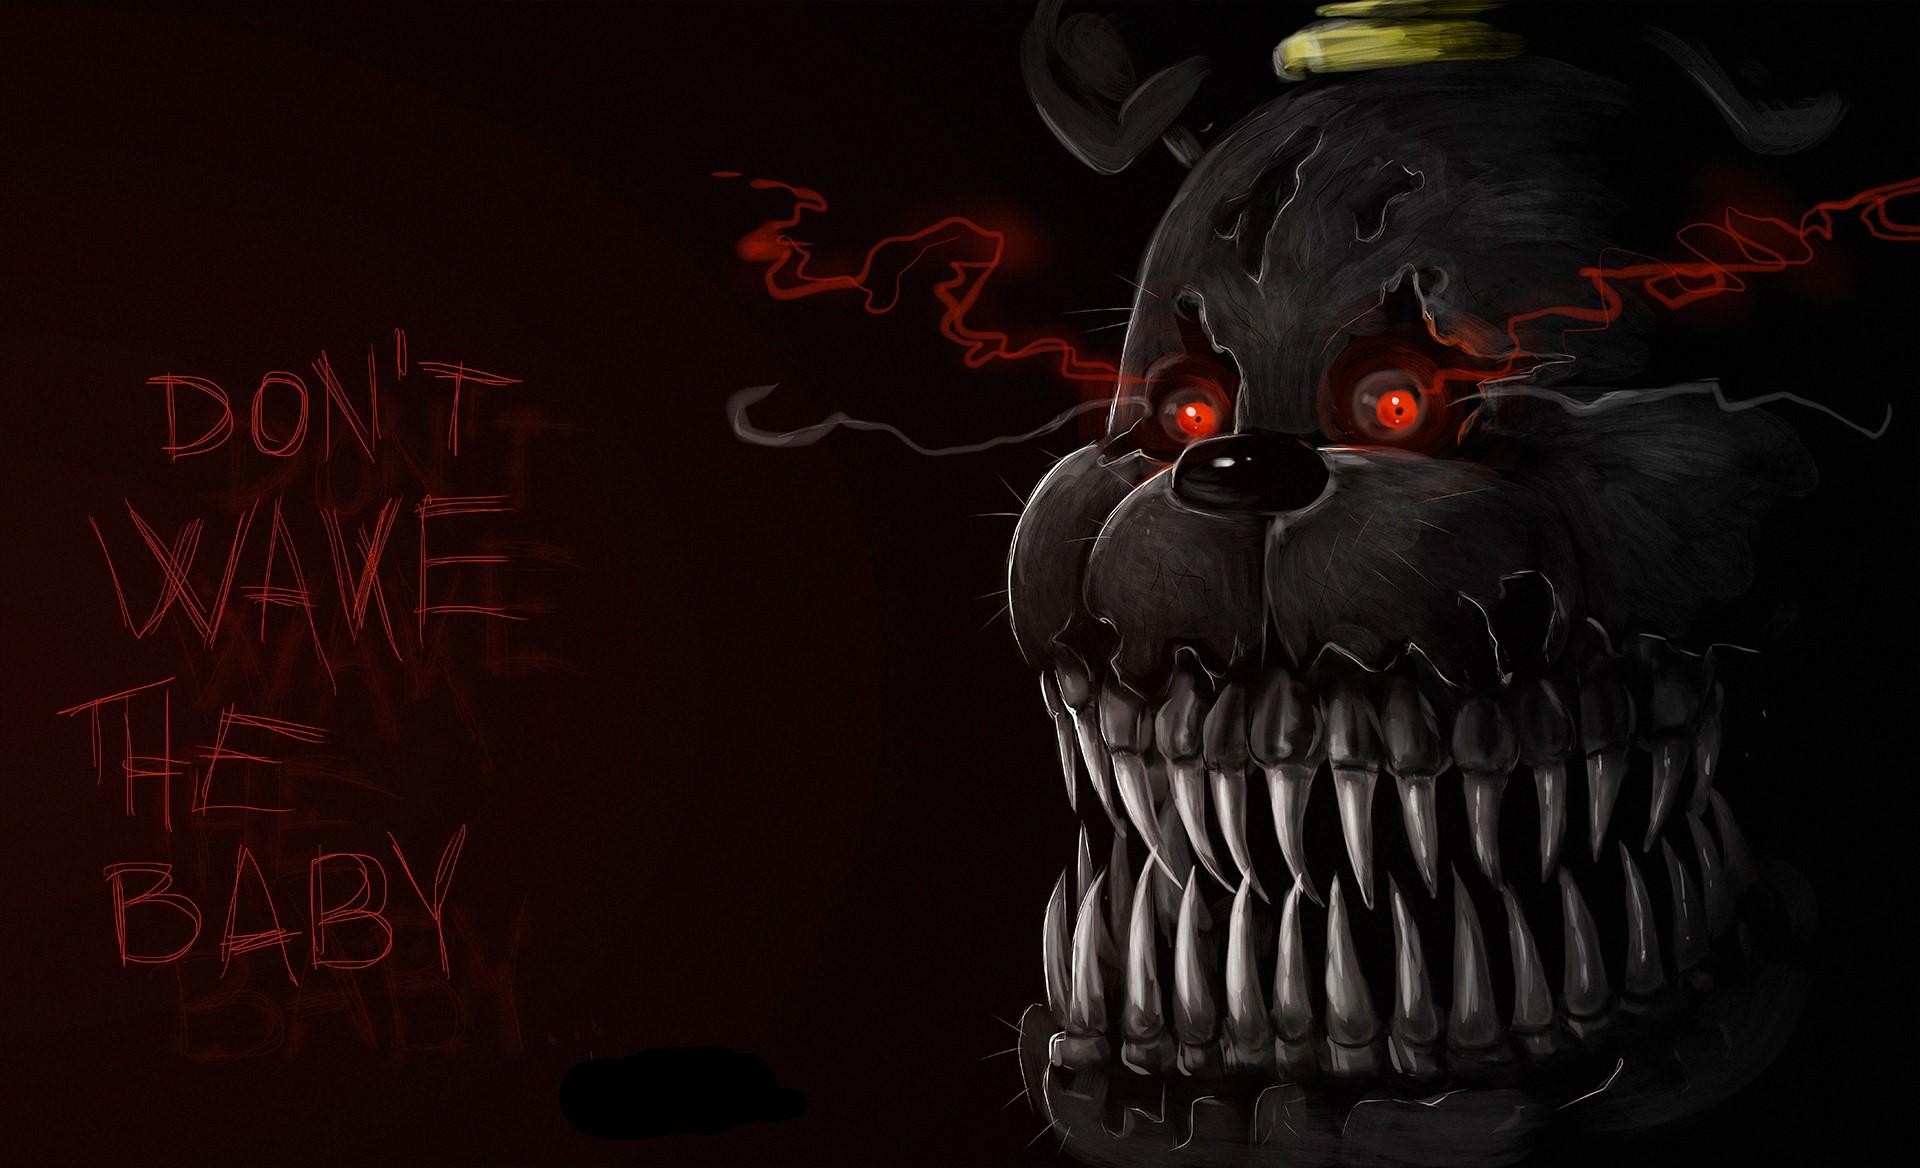 Top 10 Fnaf 4 wallpapers Five Nights At Freddys 4 Song by TryHardNinja   YouTube